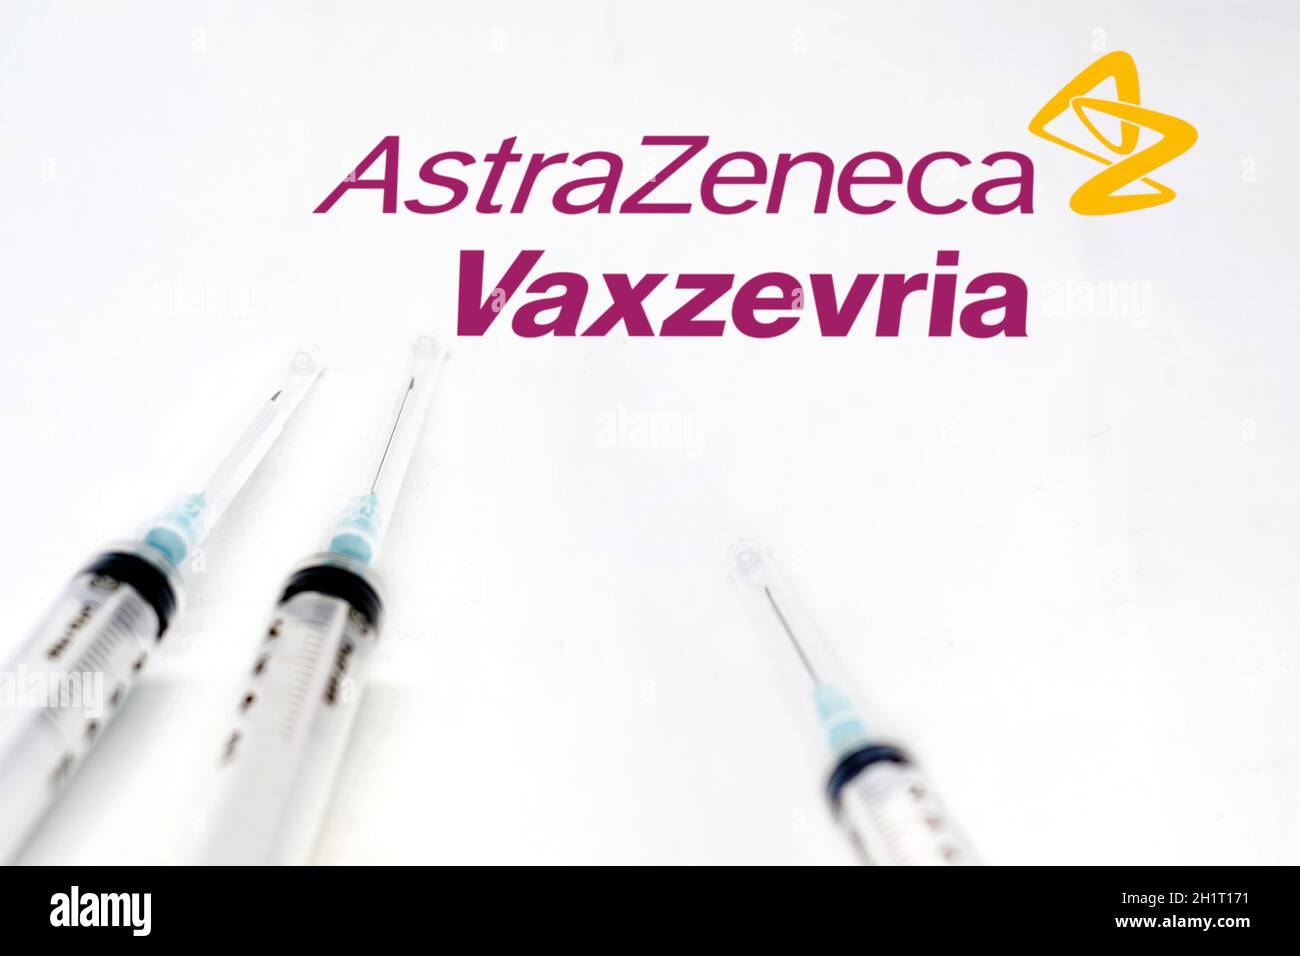 Cambridge, England, UK, march 30 2021: Three syringes next to the Vaxzevria and AstraZeneca logo isolated on a white background. Health and prevention Stock Photo